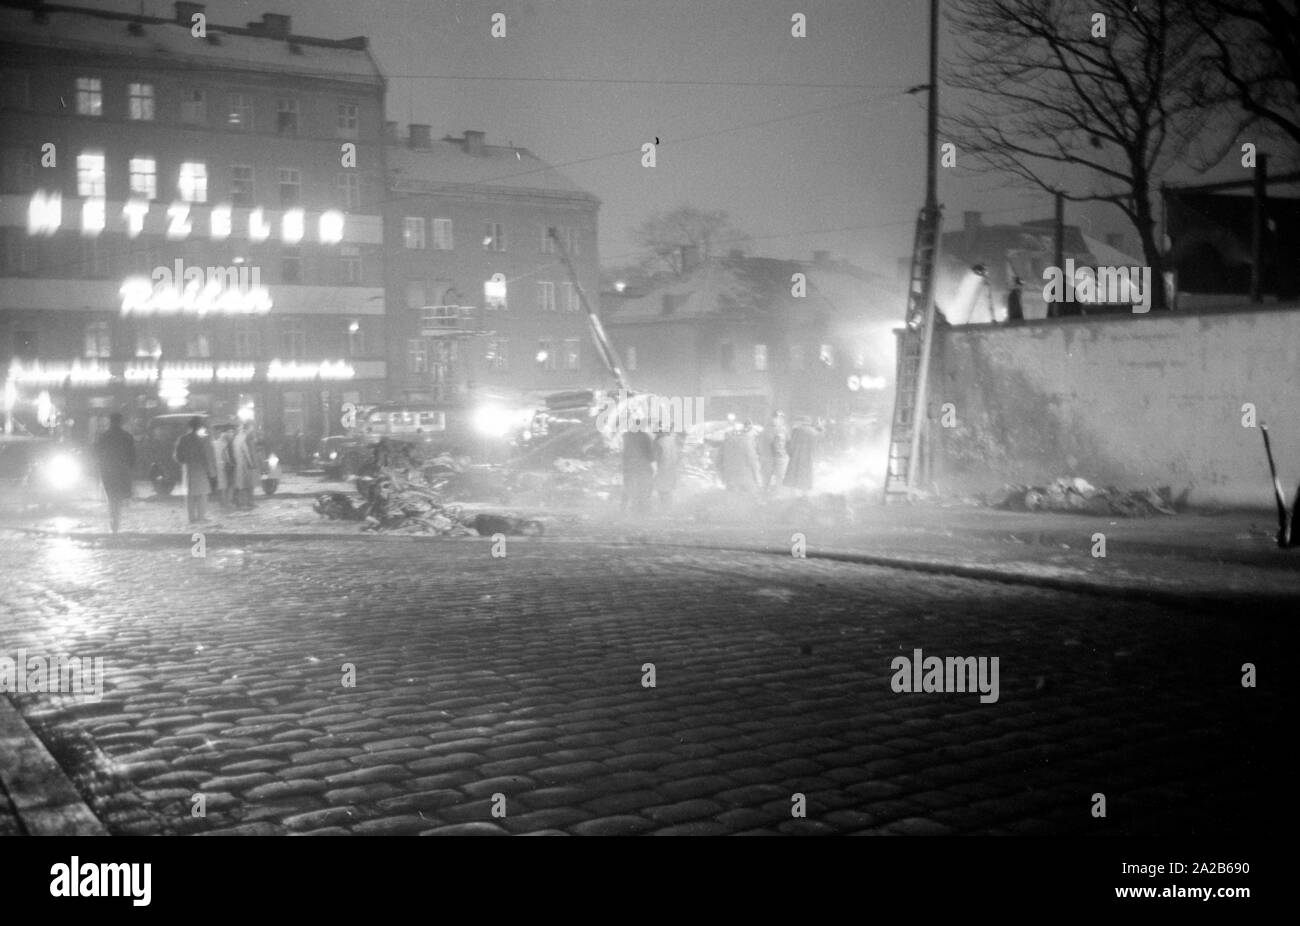 Shortly after the take off from the Munich-Riem Airport a US Air Force transport aircraft of the type Convair C-131-D Samaritan crashed in the area of Bayerstrasse / Martin-Greif Strasse on a tram. 52 people were killed. The picture shows the crash site illuminated with headlights, onlookers and wreckage. Stock Photo